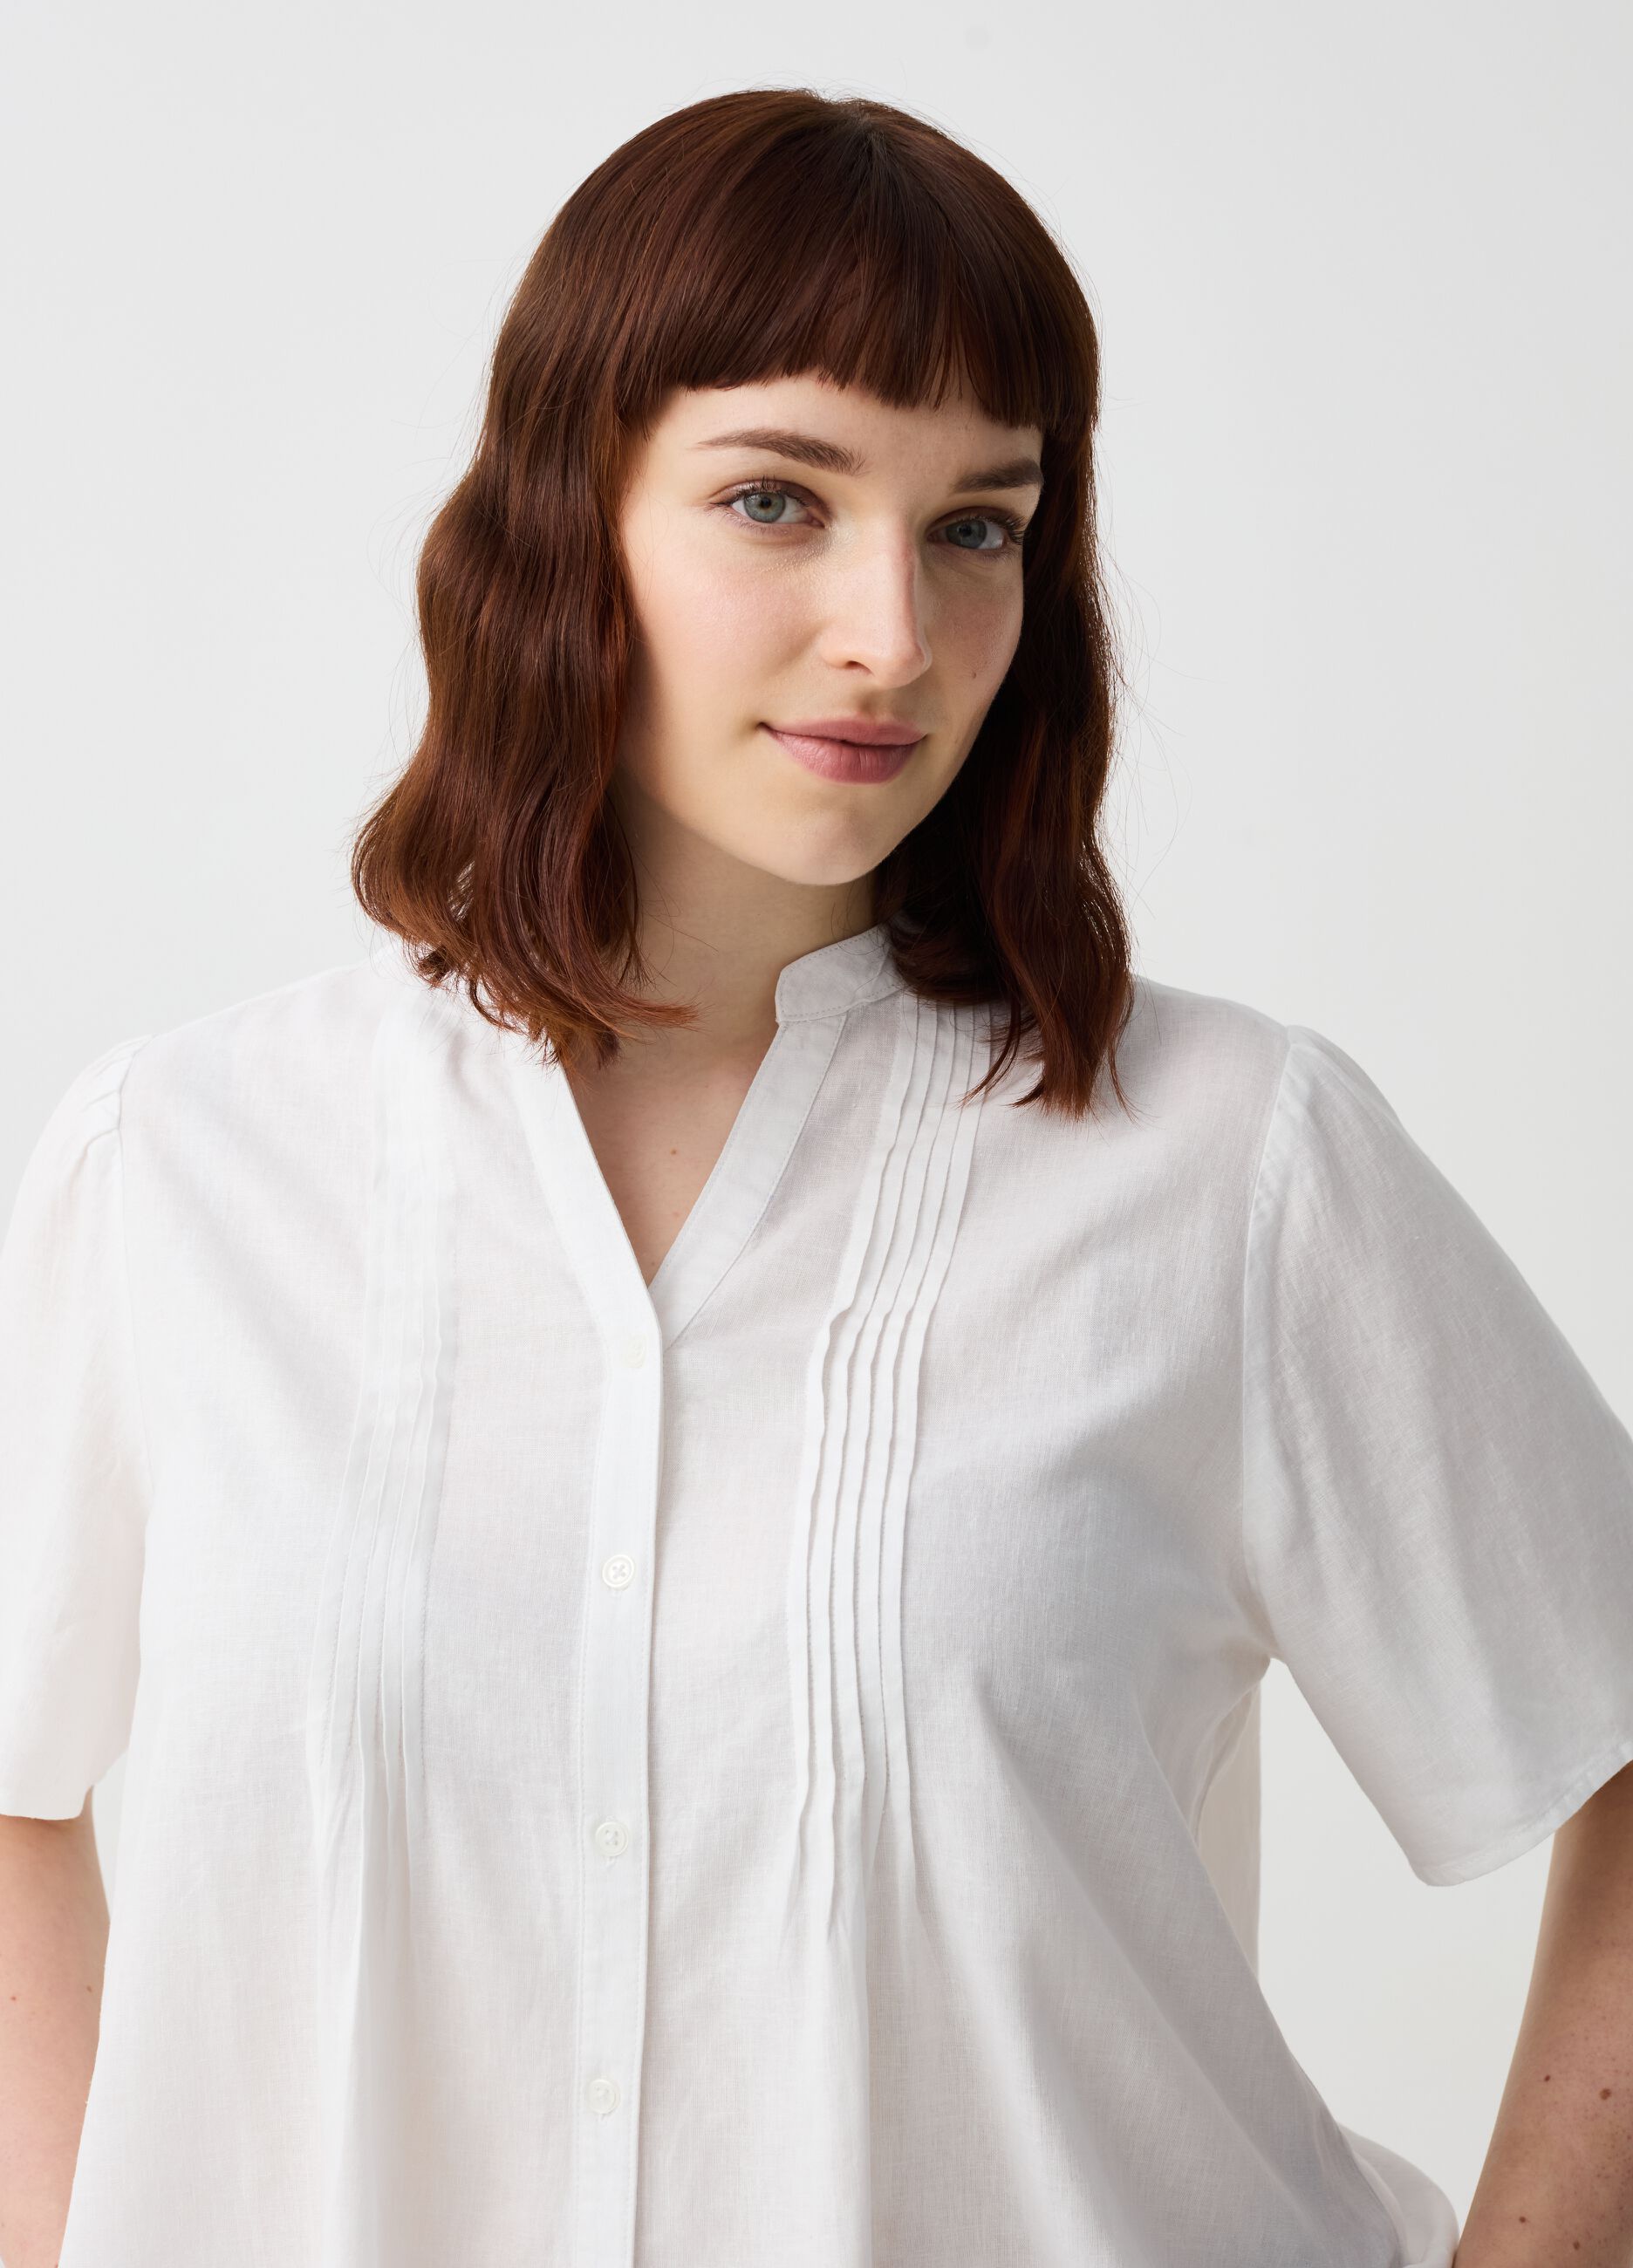 Curvy blouse in linen and viscose with buttons